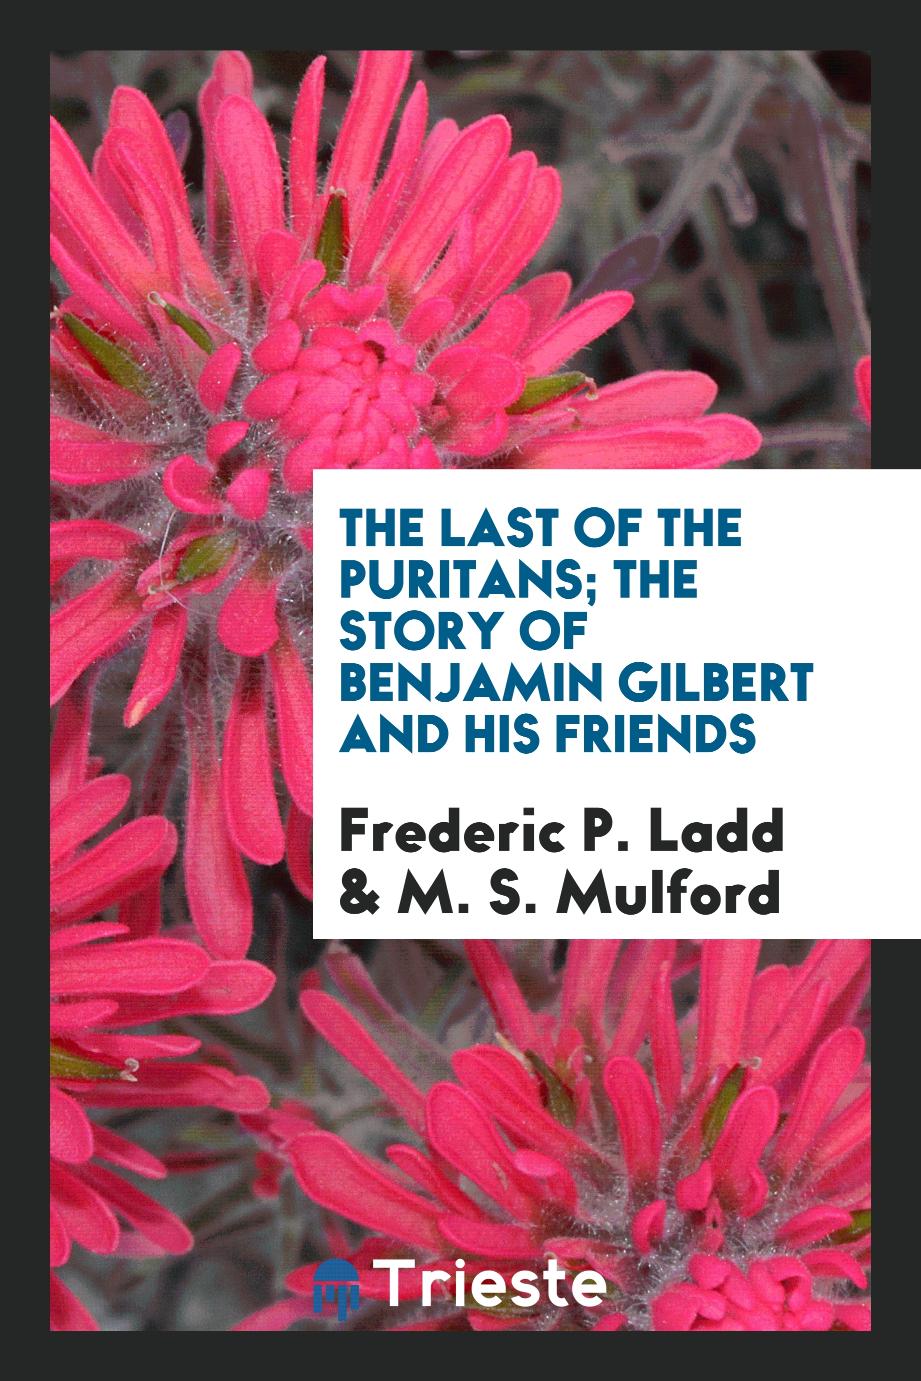 The Last of the Puritans; The Story of Benjamin Gilbert and His Friends